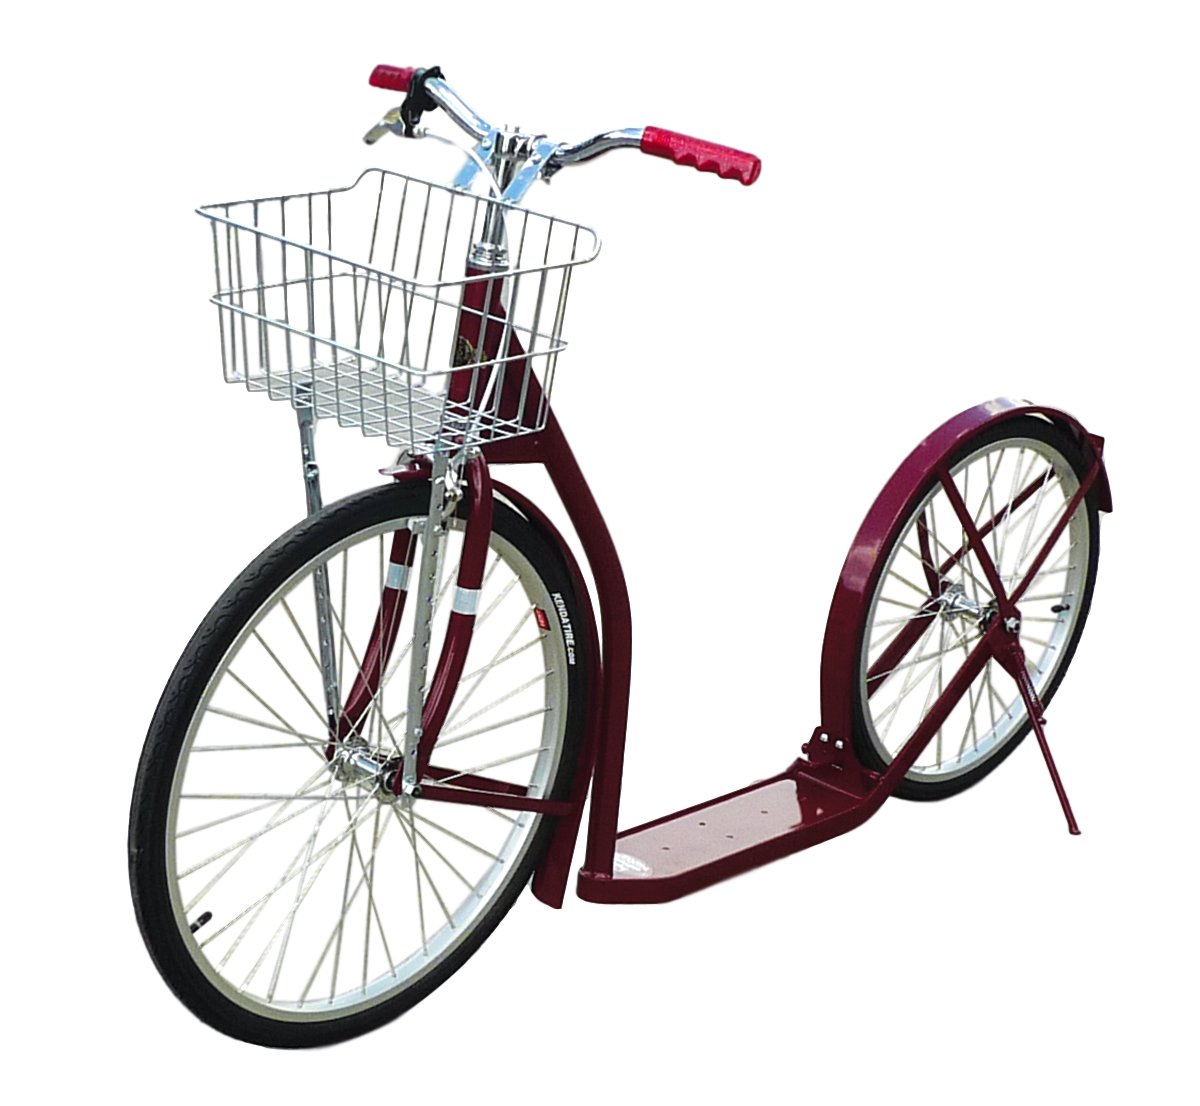 Amish-Made Deluxe Kick Scooter - Large 24" Front Wheel, 20" Rear Wheel